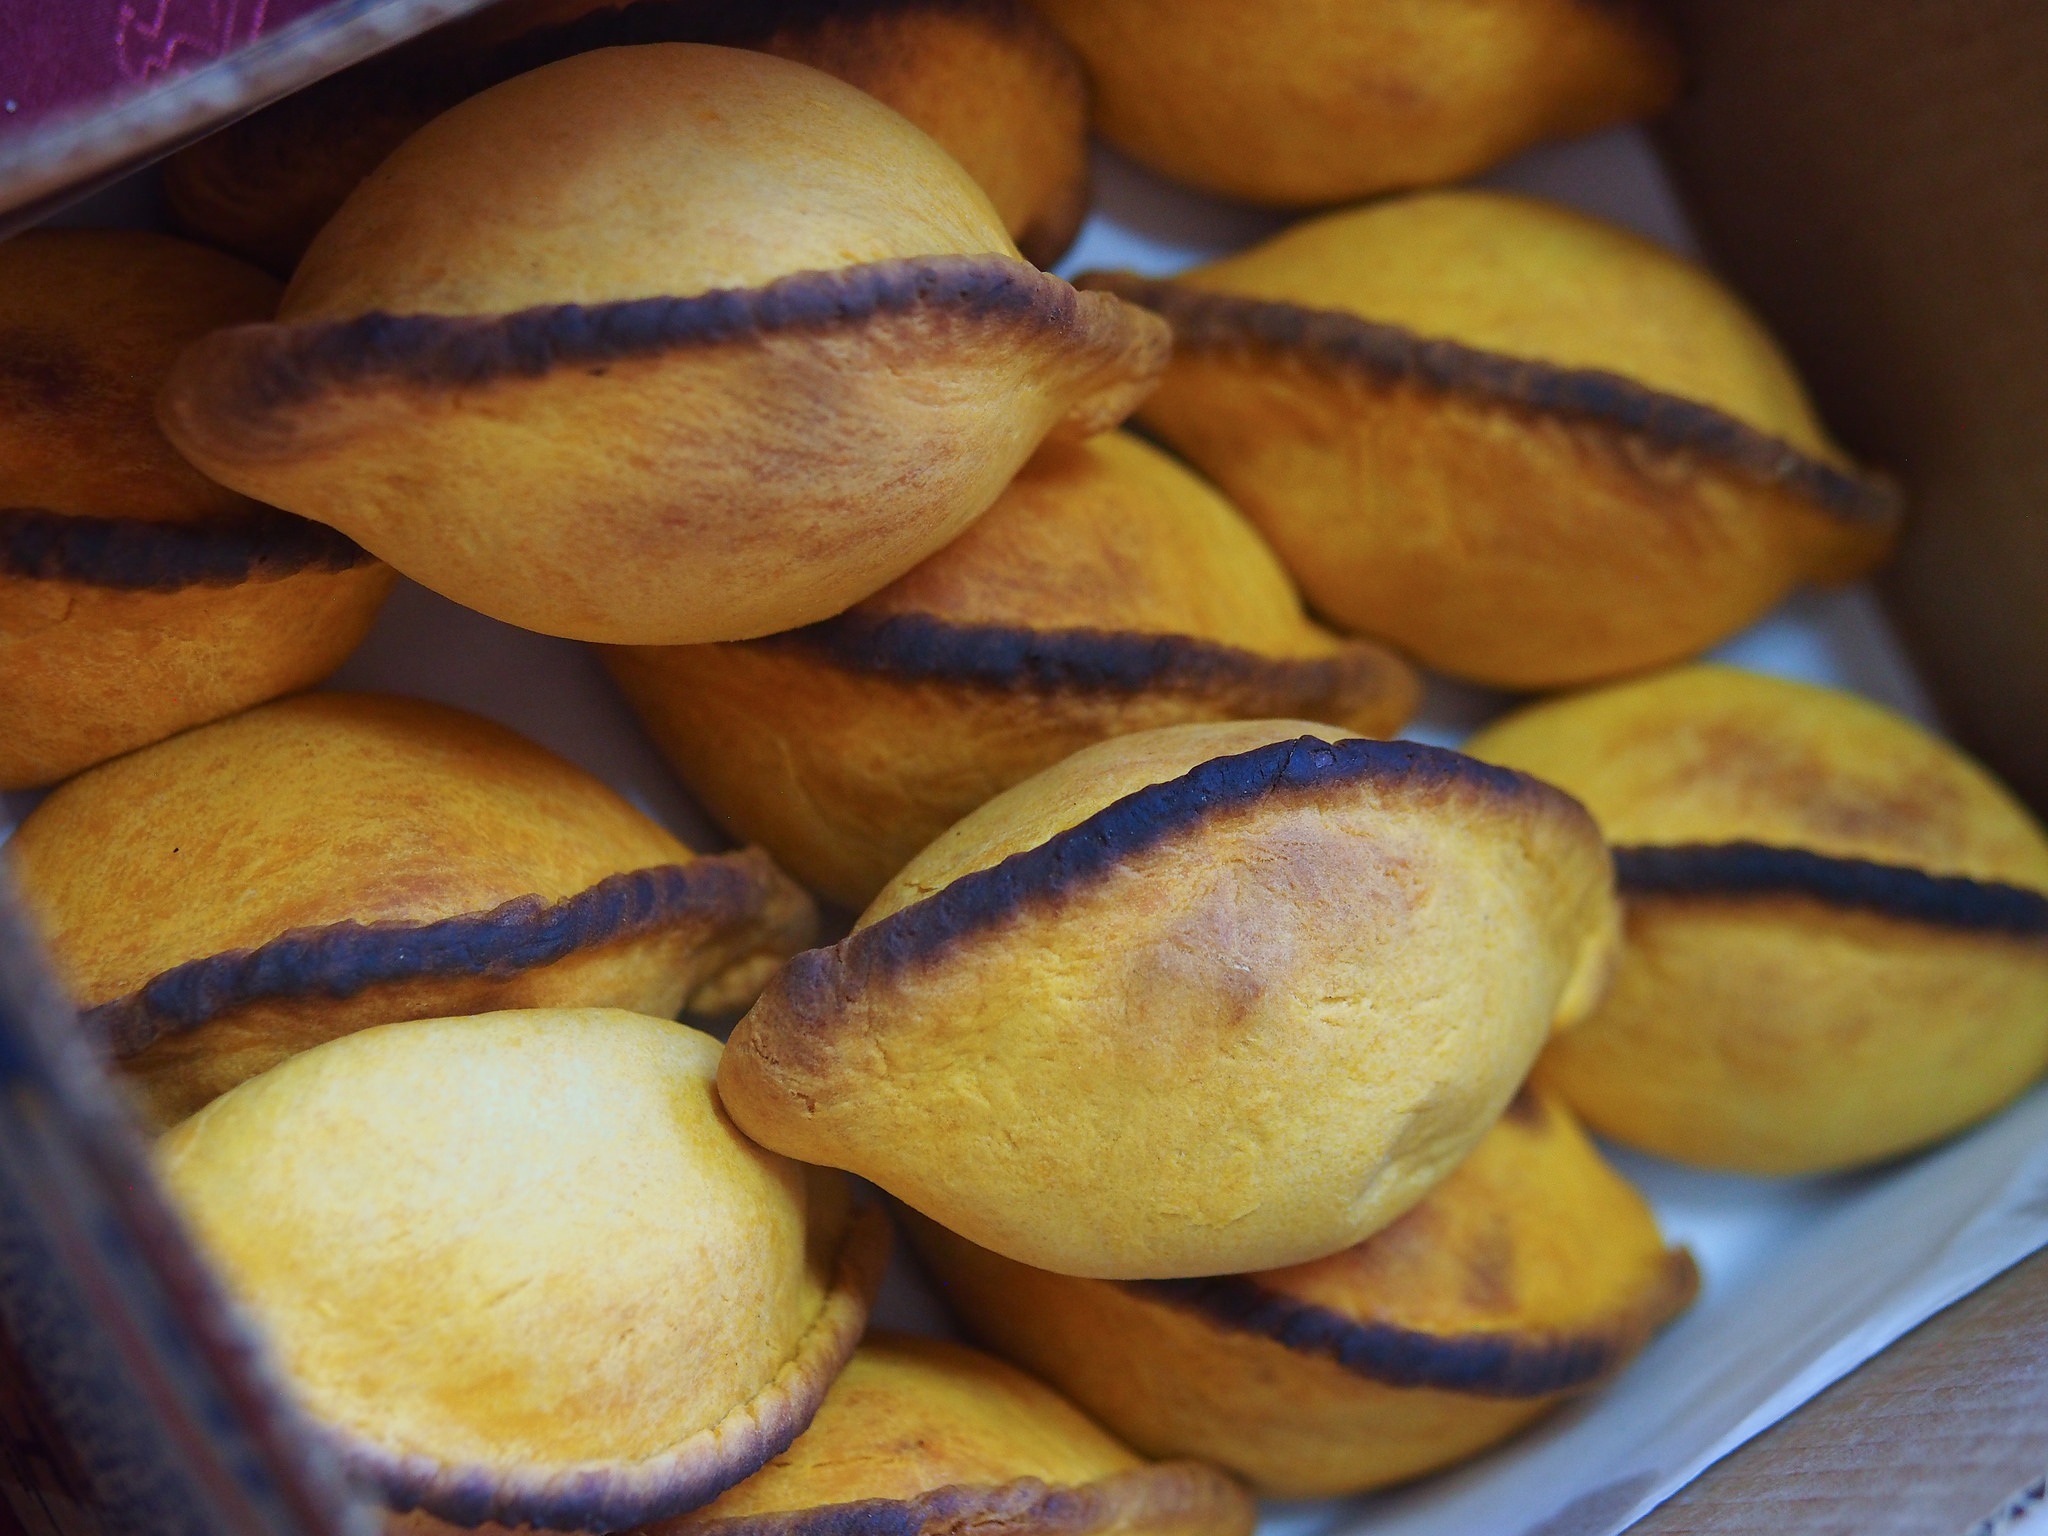     Salteñas —savory meat pies filled with meat or chicken—are a light meal or snack. “A true Bolivian will be able to eat it without leaving any liquid on the plate,” using a spoon to catch the delicate broth, says Encinas. 